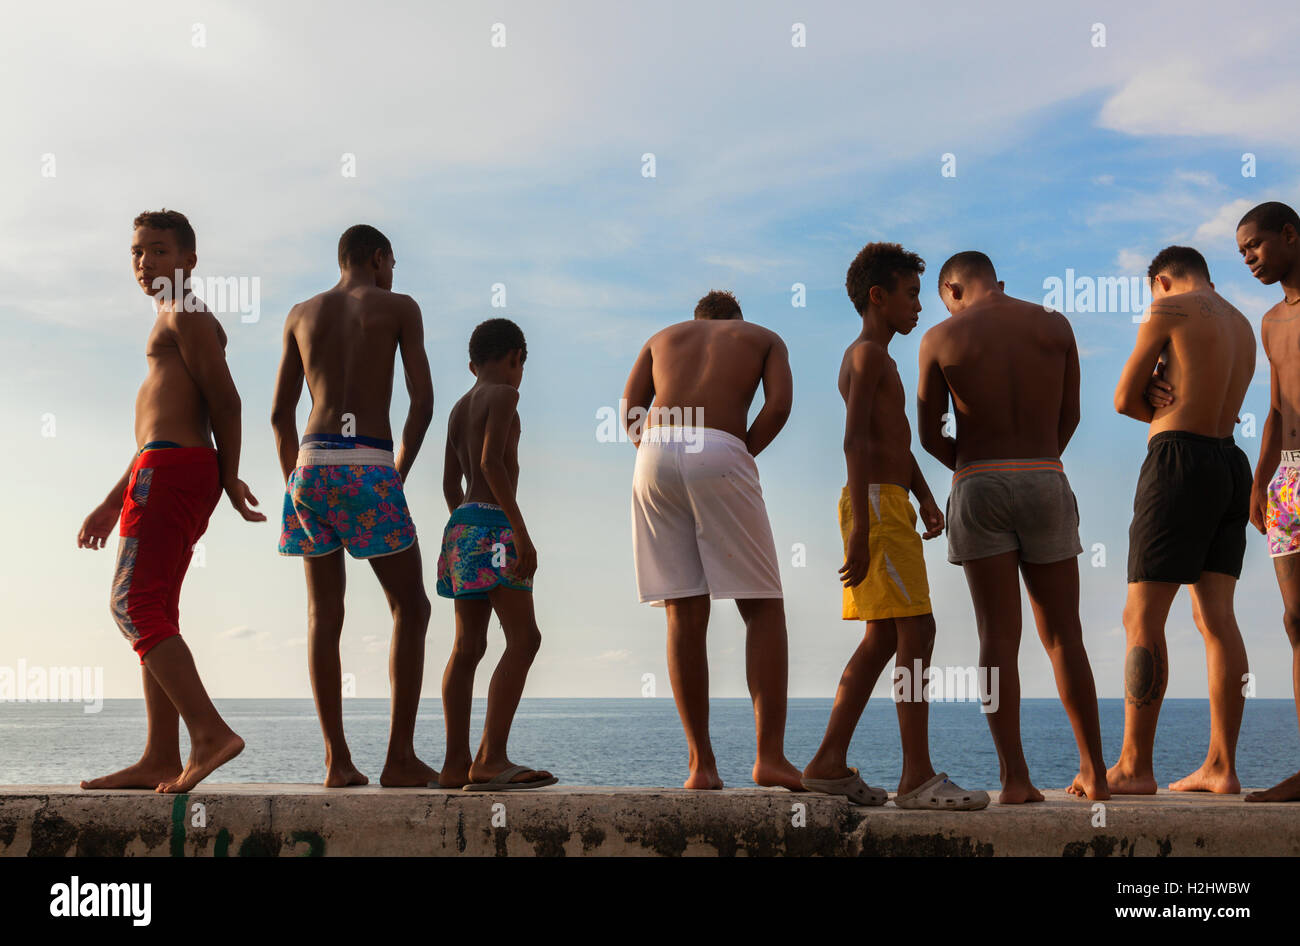 Kids in their bathing suits standing along the seawall about to go swimming along the Malecón in Central Havana, Cuba. Stock Photo